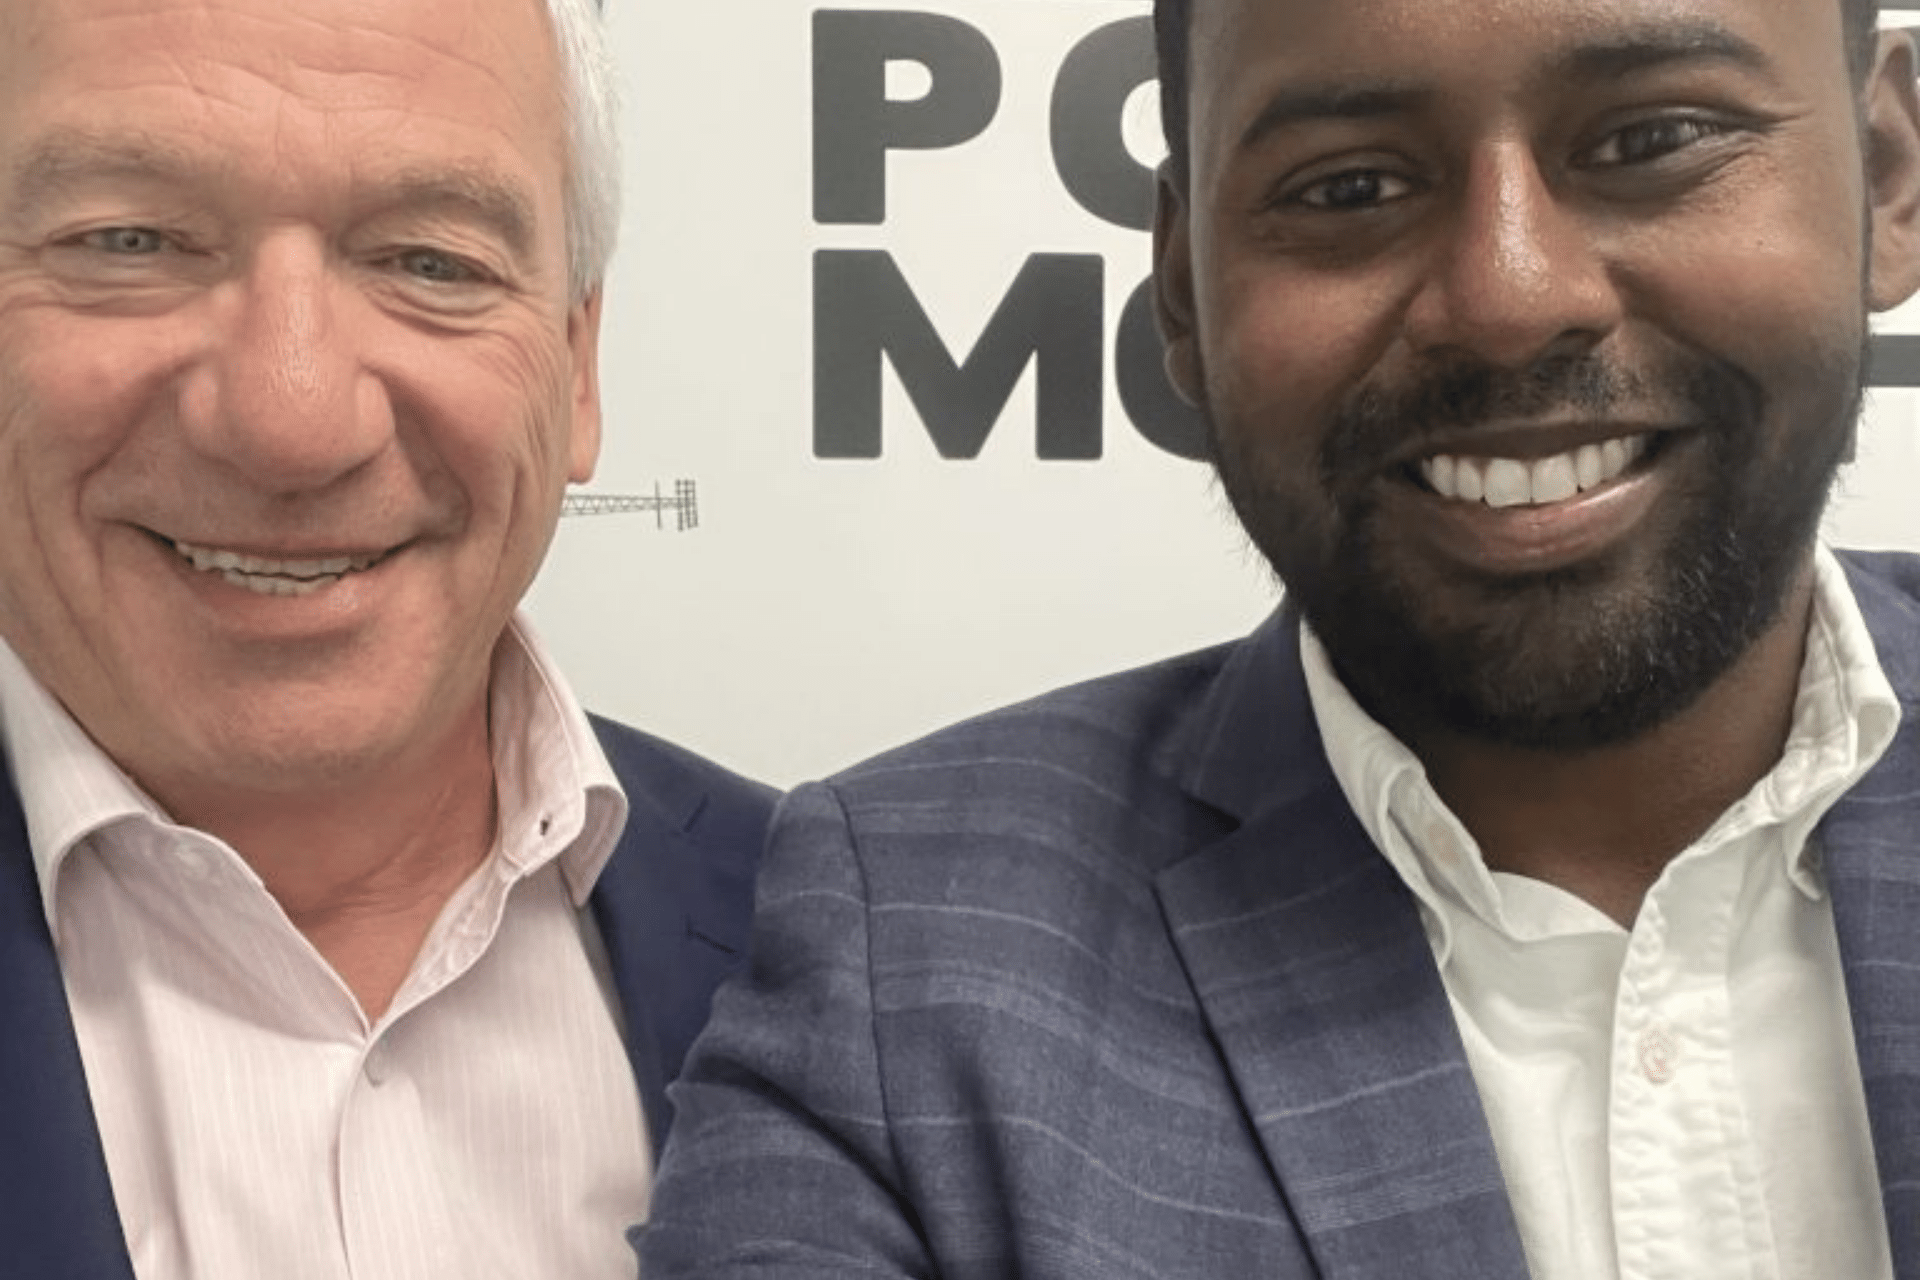 Digital Agency Partners With Shaping Portsmouth